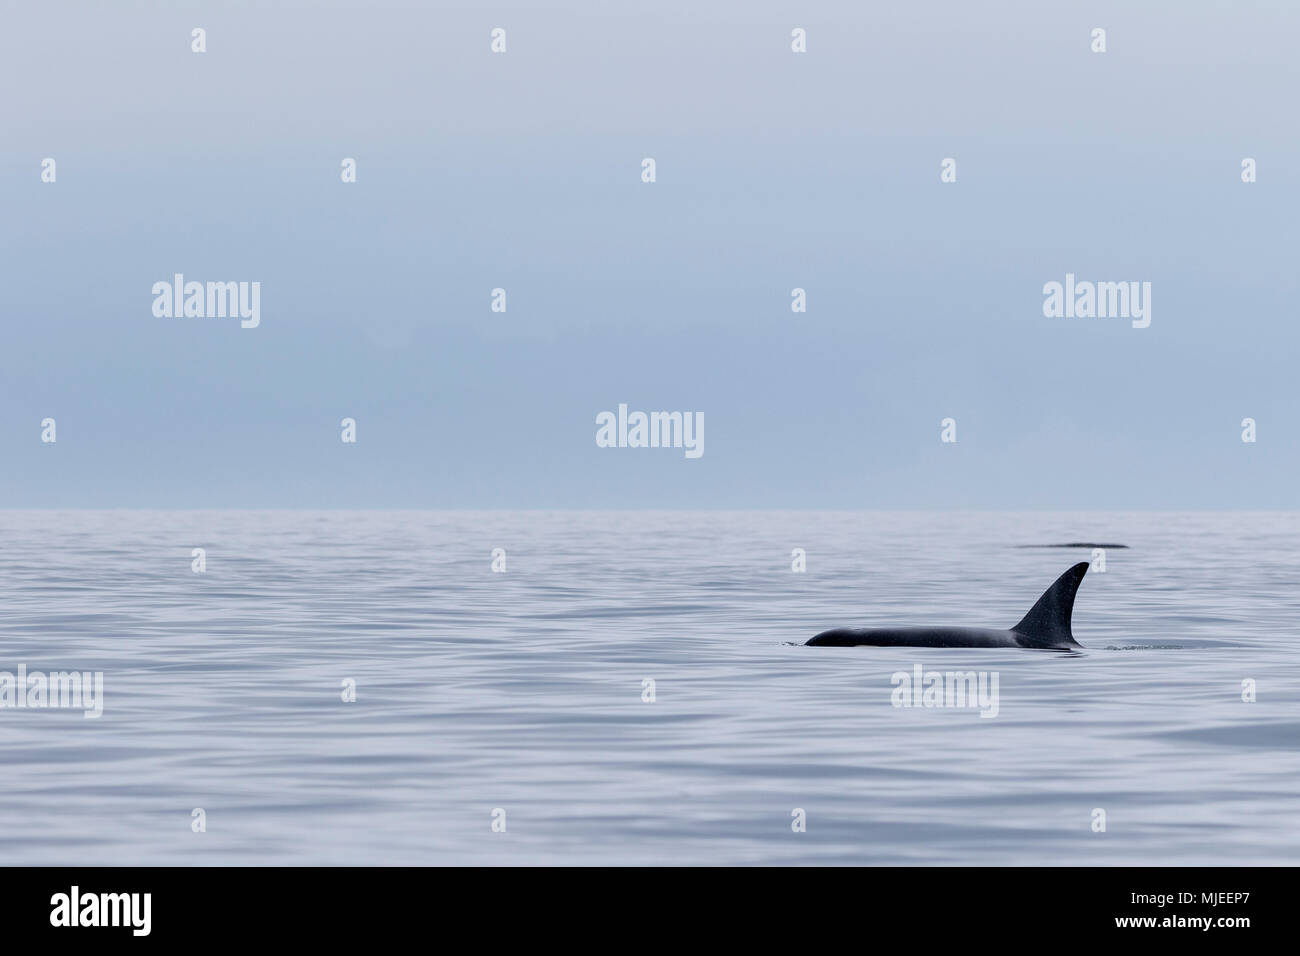 Northern resident A30 killer whale (Orcinus orca) travelling through the fog in Queen Charlotte Strait off northern Vancouver Island, British Columbia, Canada. Stock Photo